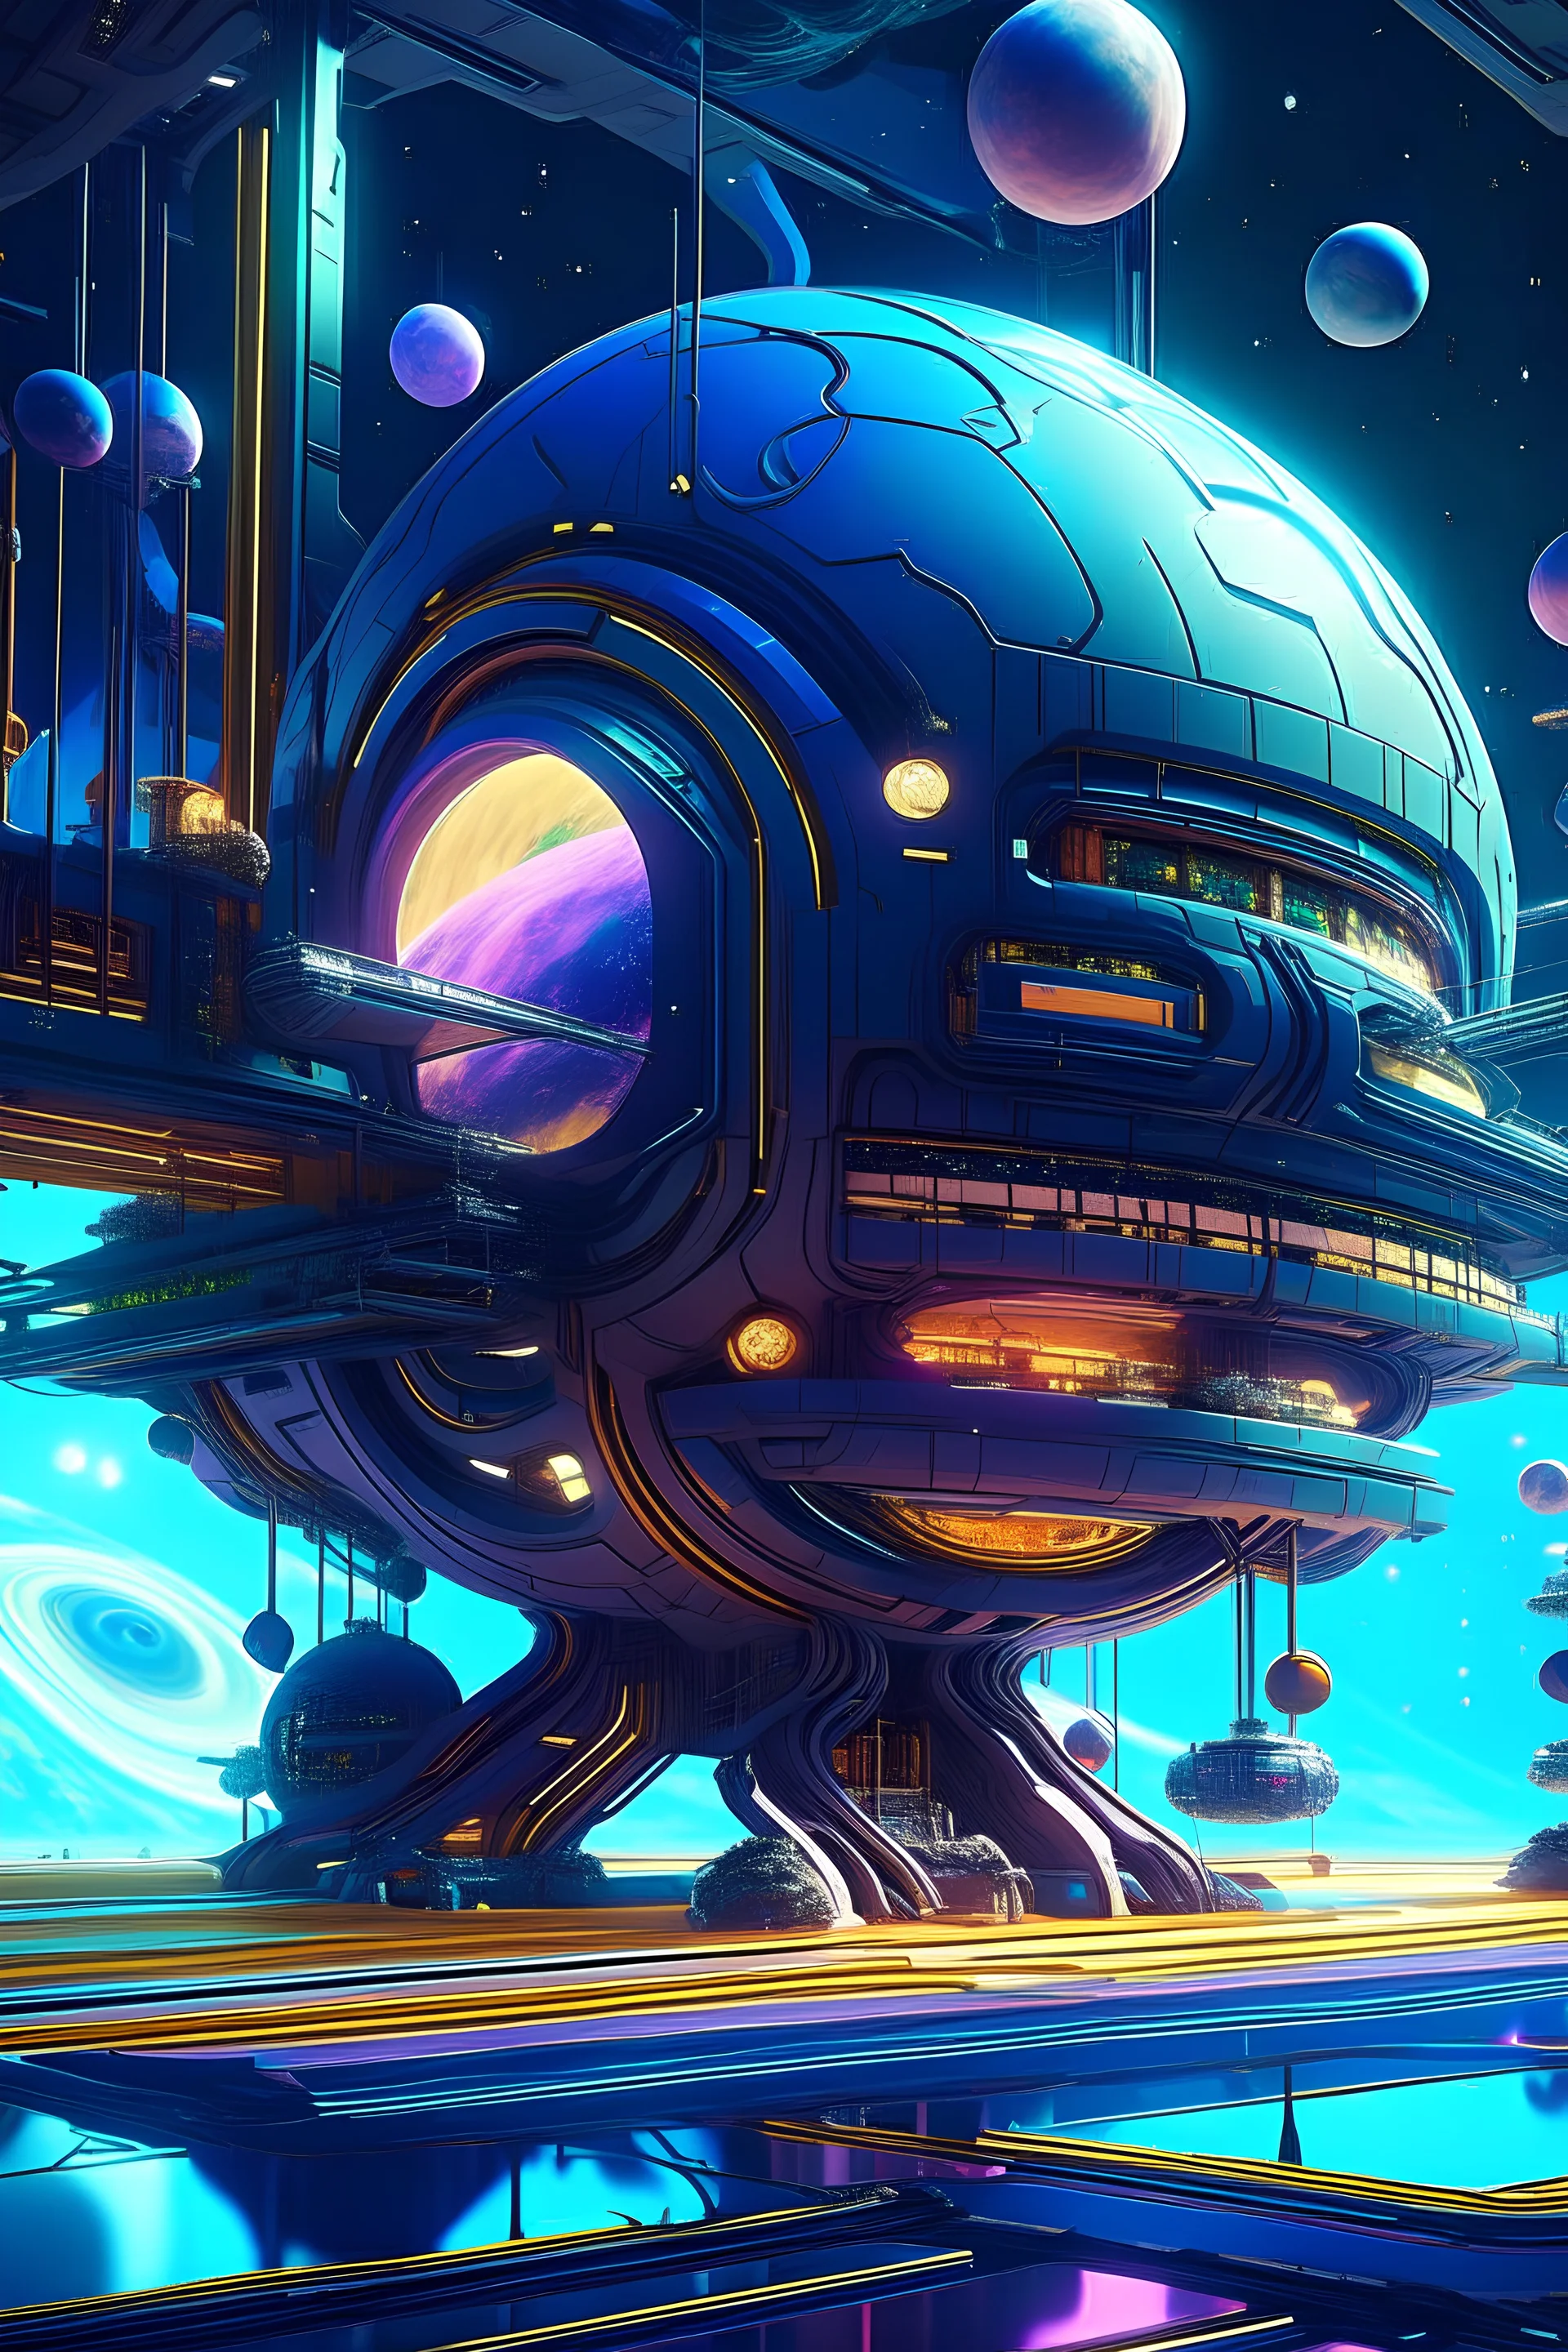 a futuristic space station with planets in the background, inspired by Mike Winkelmann, retrofuturism, colorful flat surreal design, cartoon fantasy spaceship, a beautiful artwork illustration, colorful retrofutur, ultra detailed illustration, futuristic house, retro-futuristic, spaceship night, 70s retro sci-fi, higher detailed illustrationdigital ilustration, melted cyborg, artwork